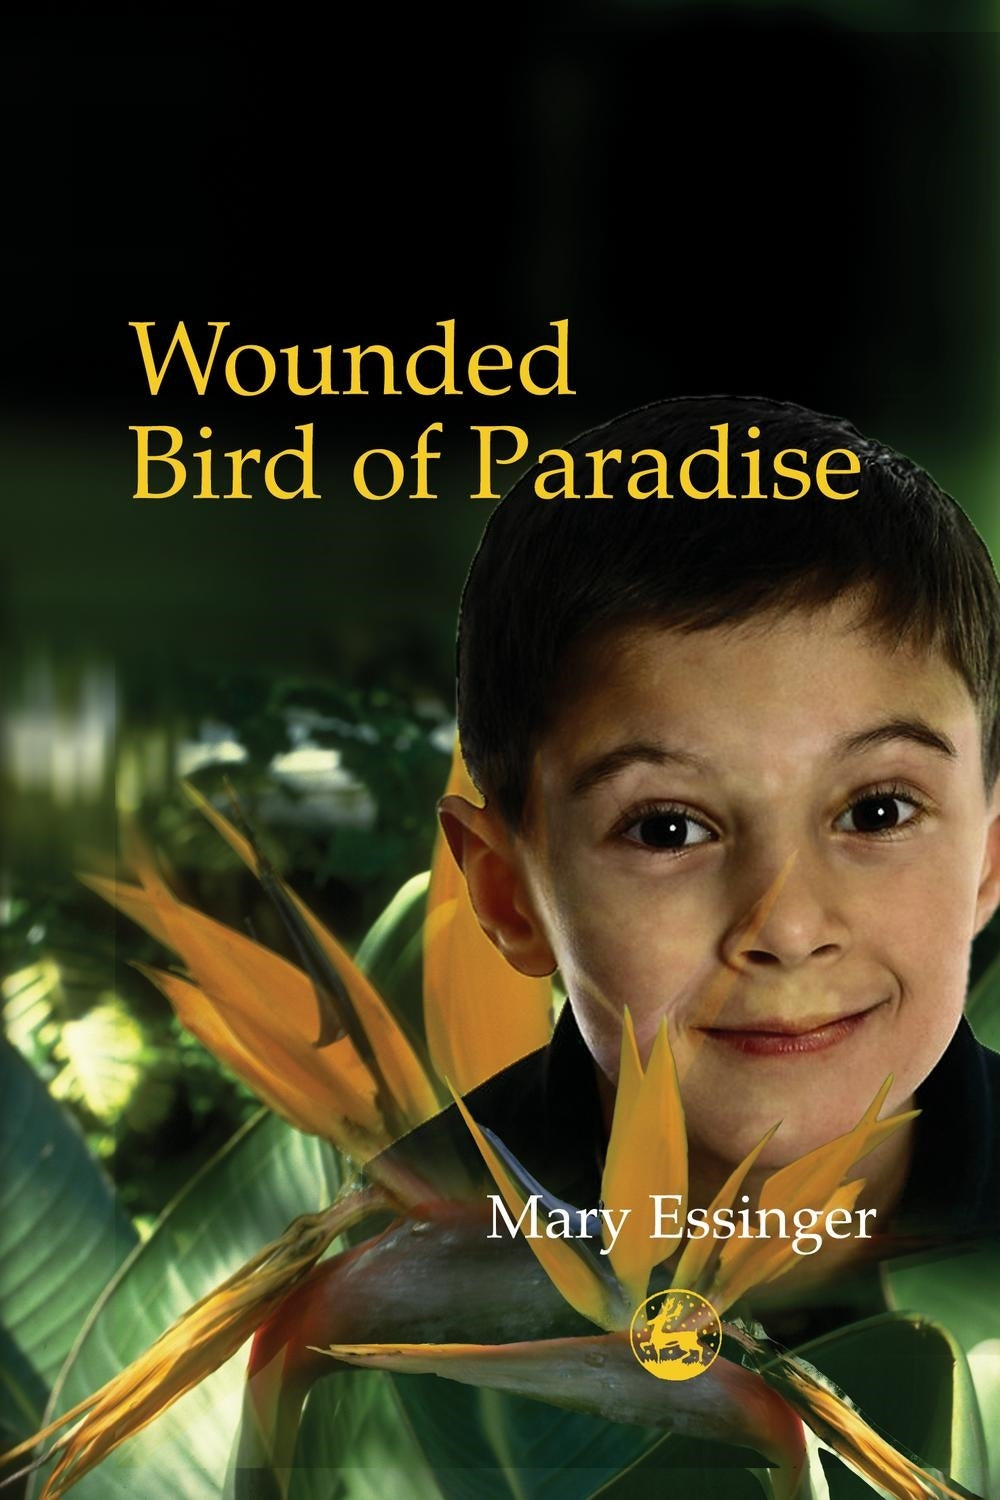 Wounded Bird of Paradise by Mary Essinger